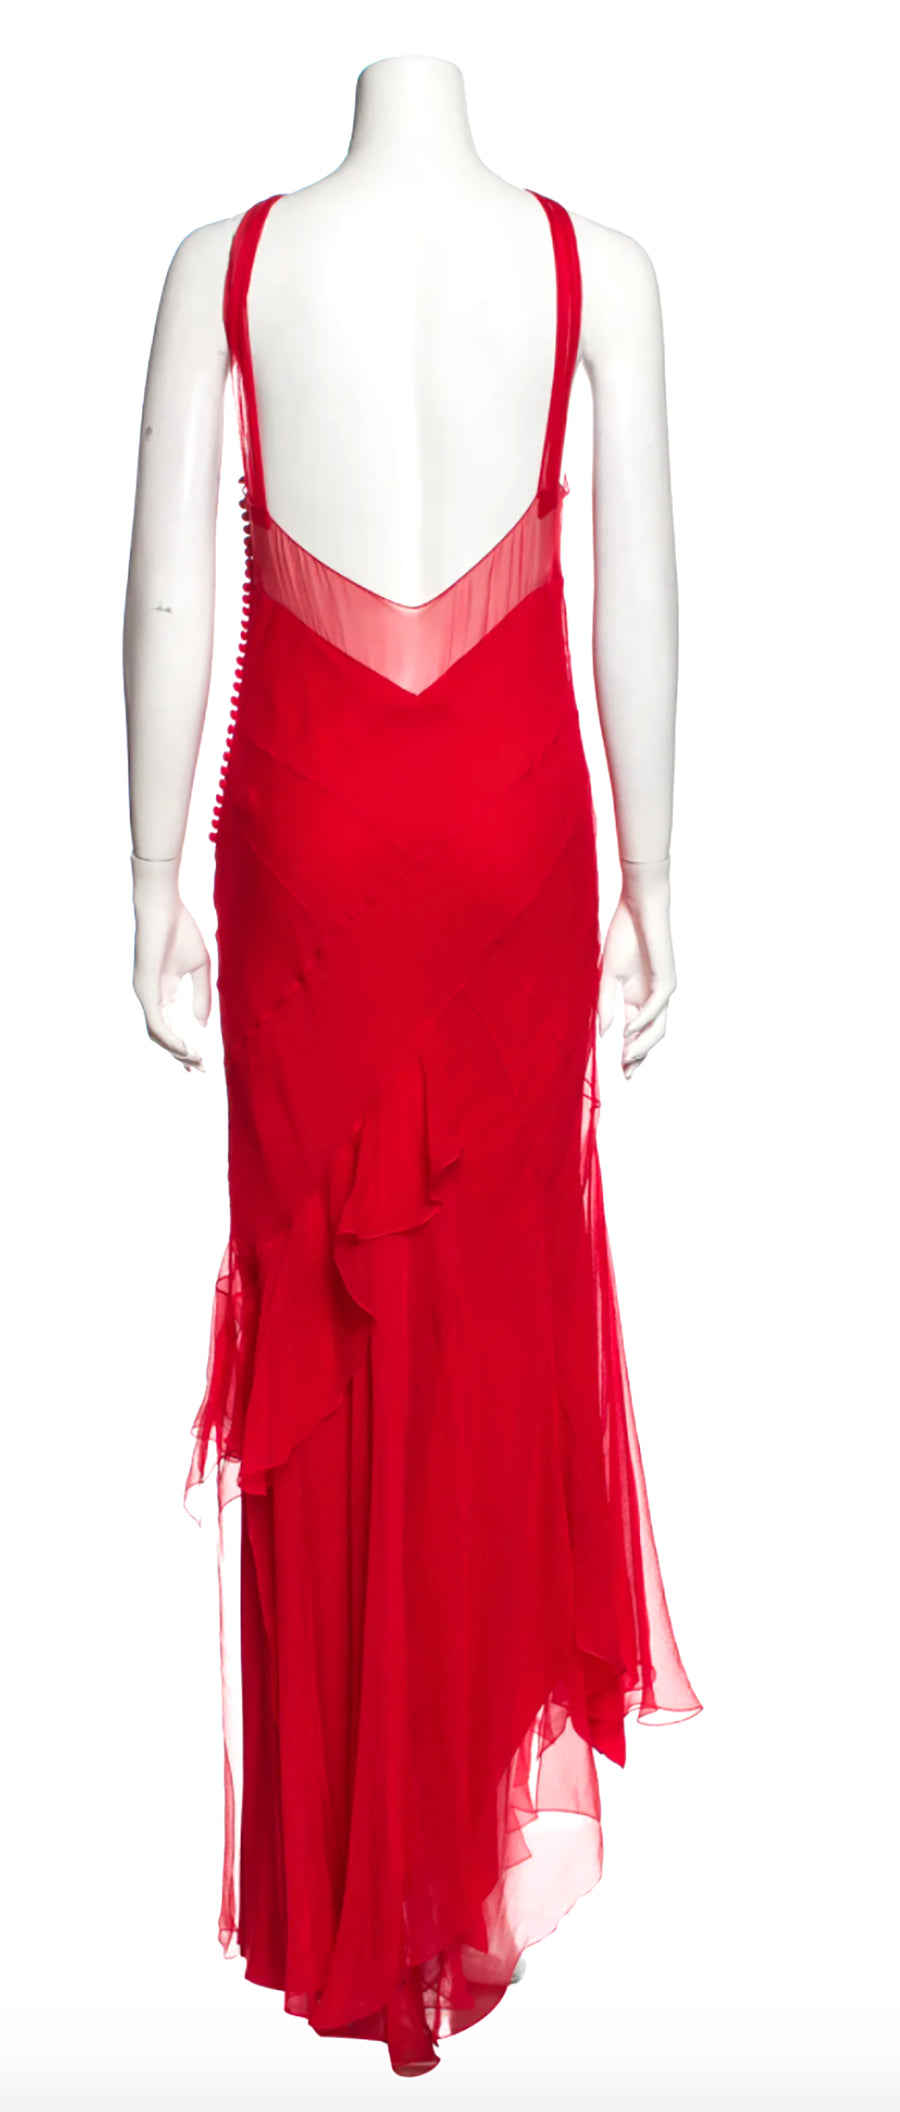 CHRISTIAN DIOR BY GALLIANO RED CHIFFON GOWN